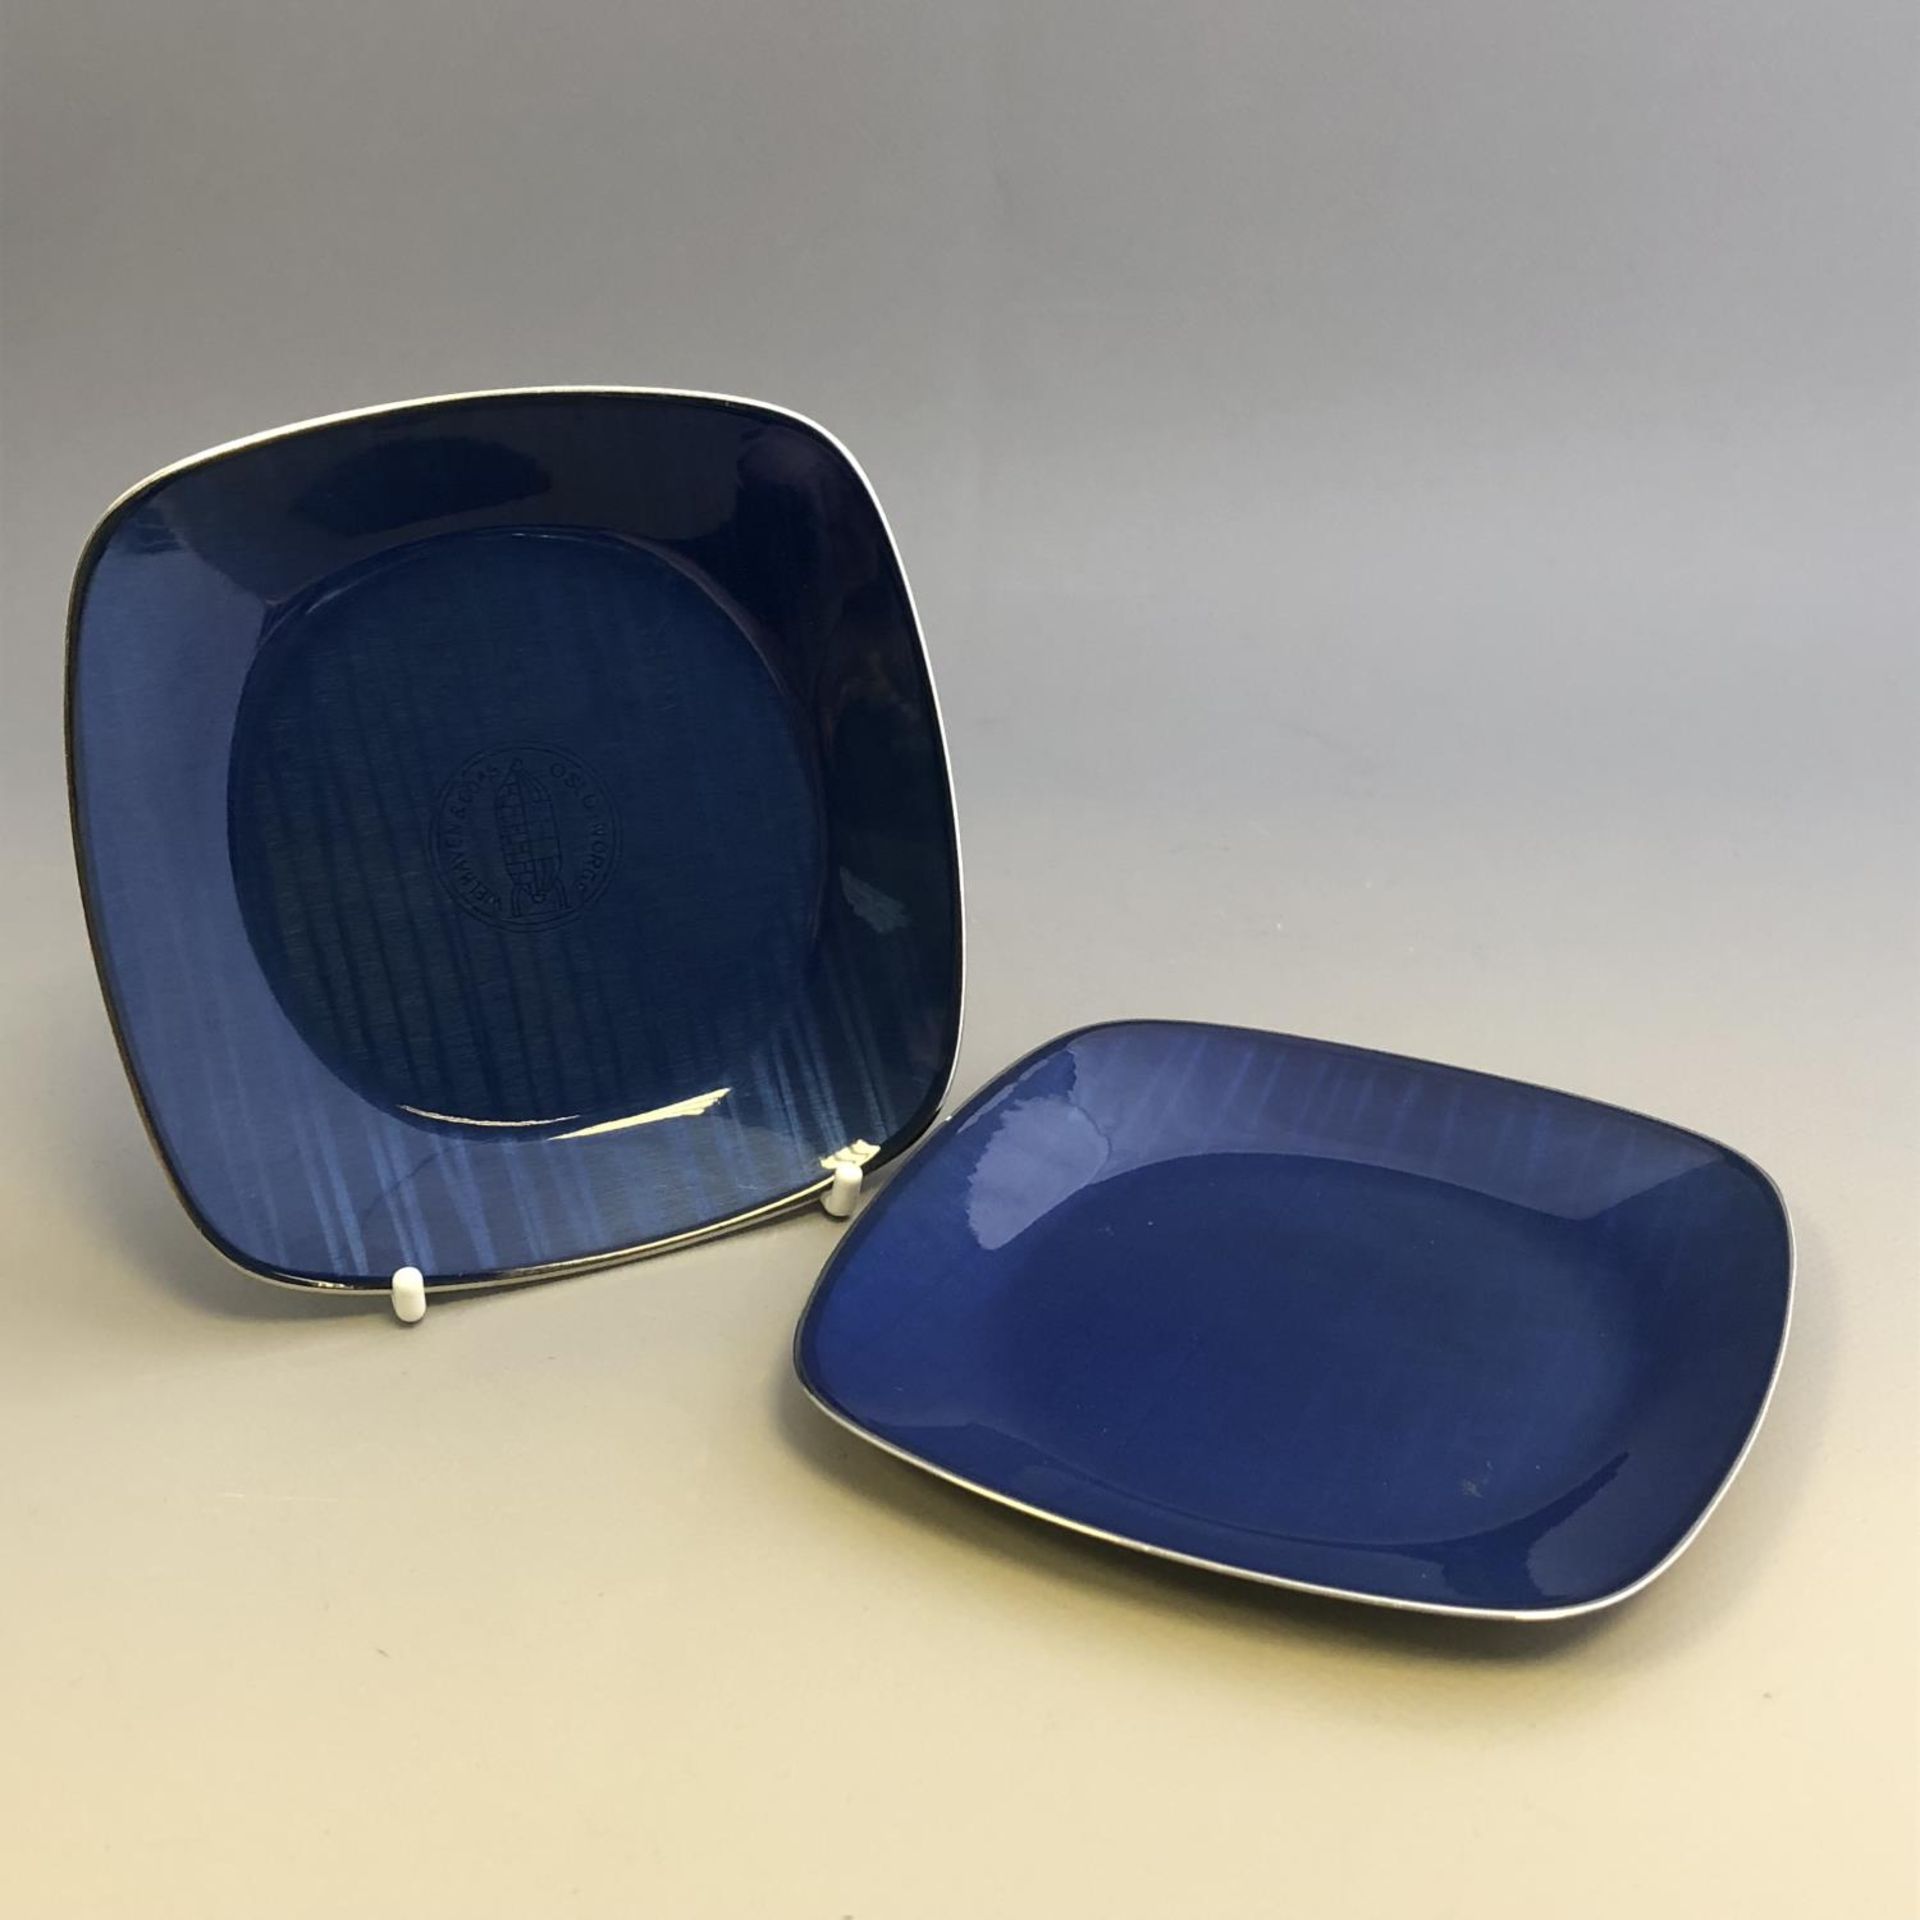 Pair of Stainless Steel and Blue Enamel Dishes - Cathrineholm - Norway